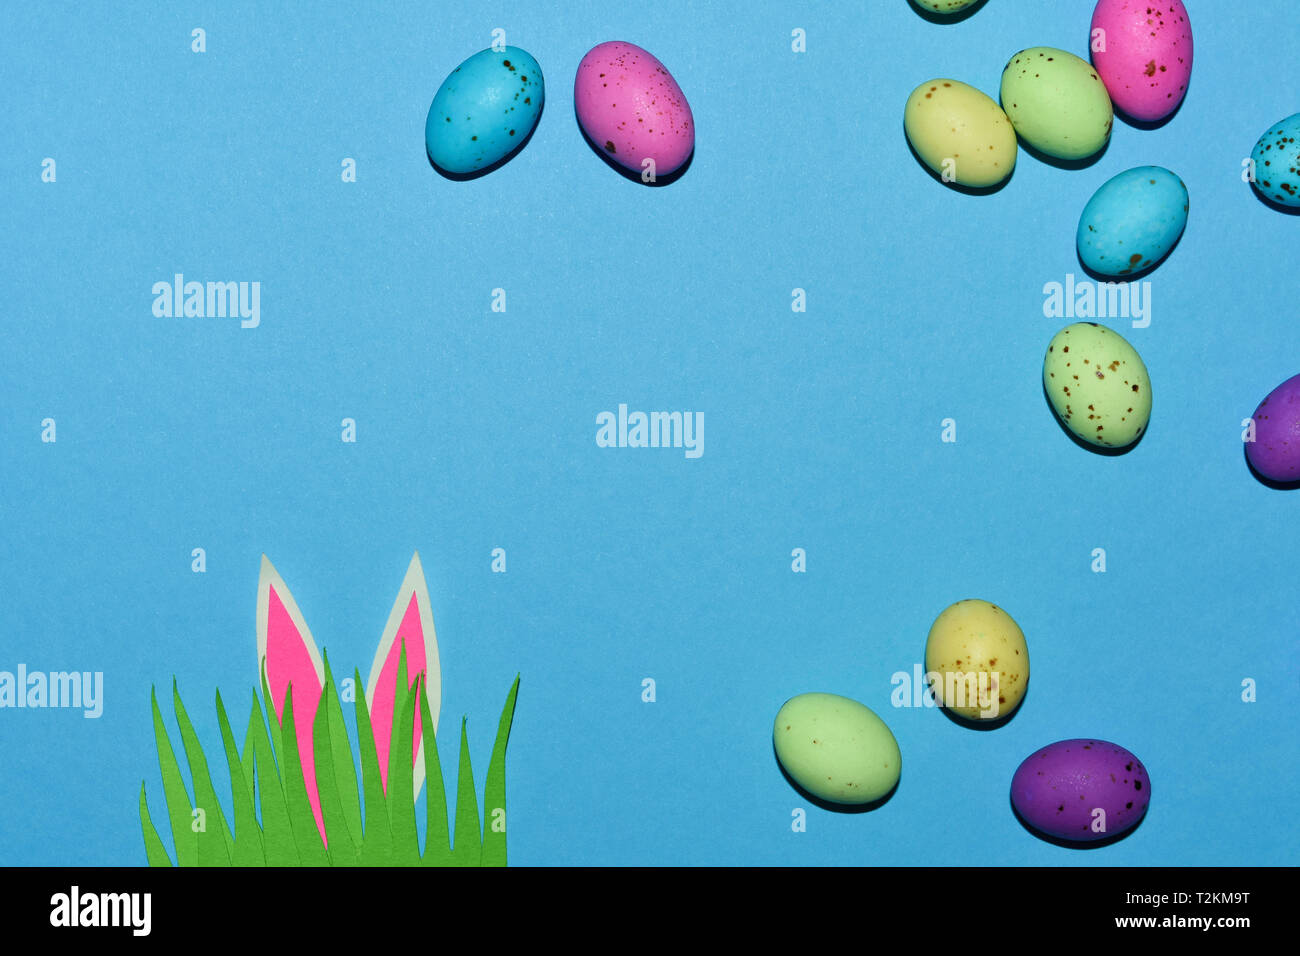 Candy Eggs On Blue With Grass Patch And Rabbit Ears Stock Photo